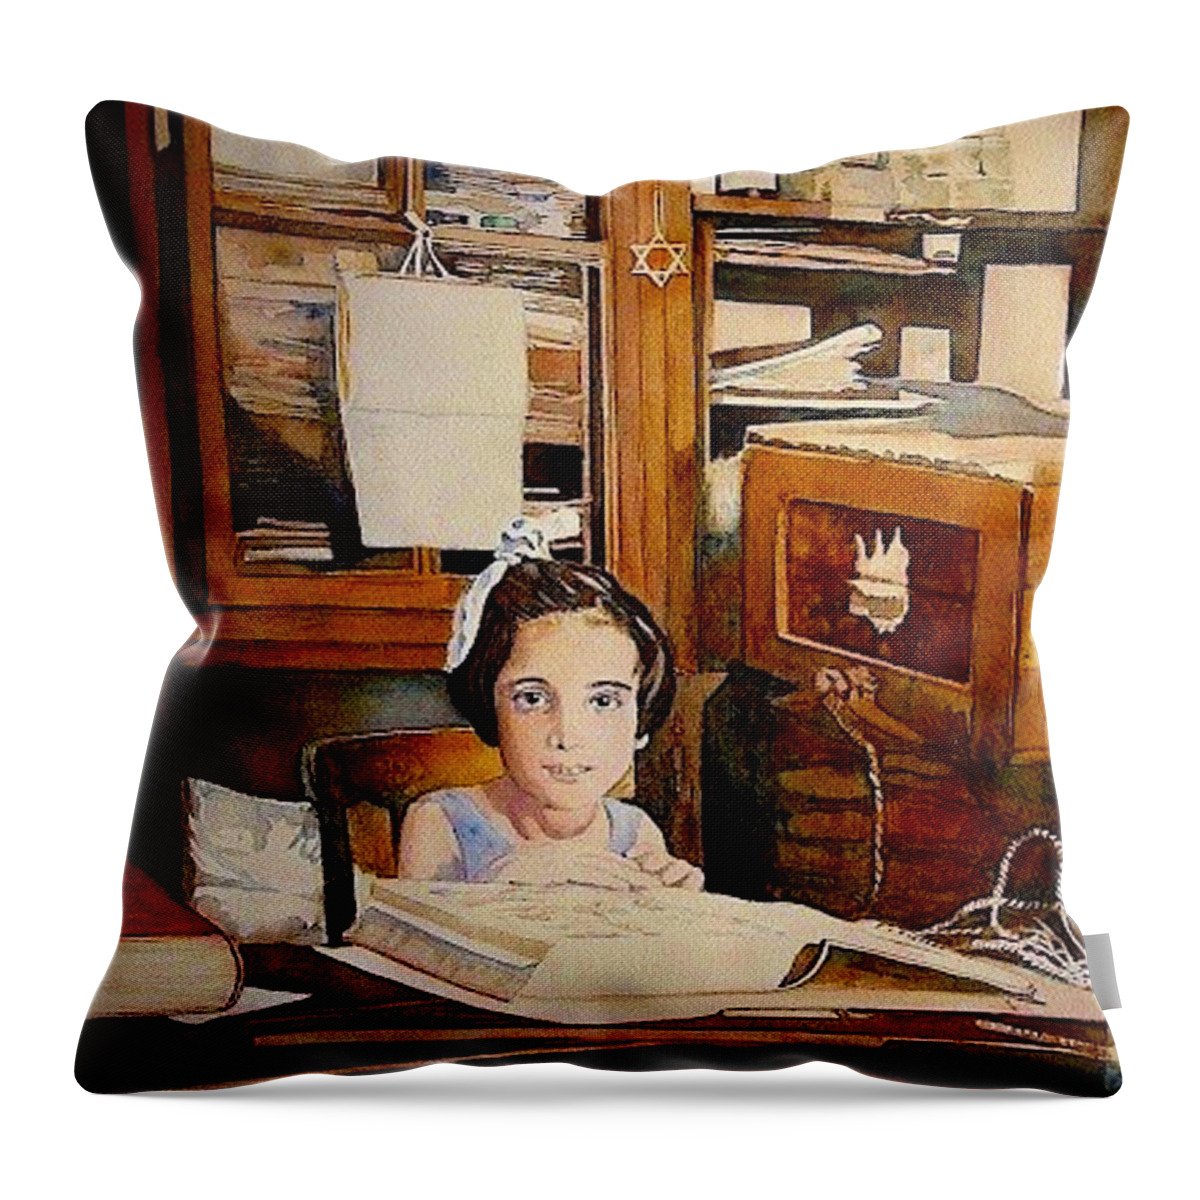 Fillette Throw Pillow featuring the painting Etudes by Francoise Chauray